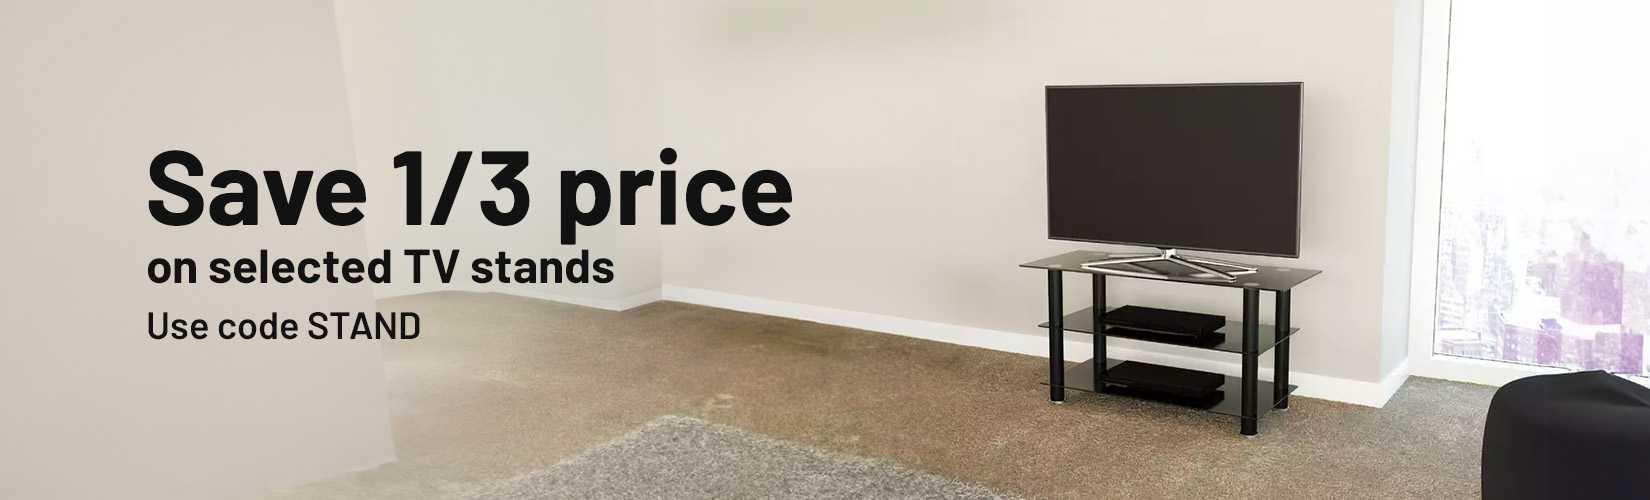 Save 1/3 price on selected TV stand. Use code STAND.